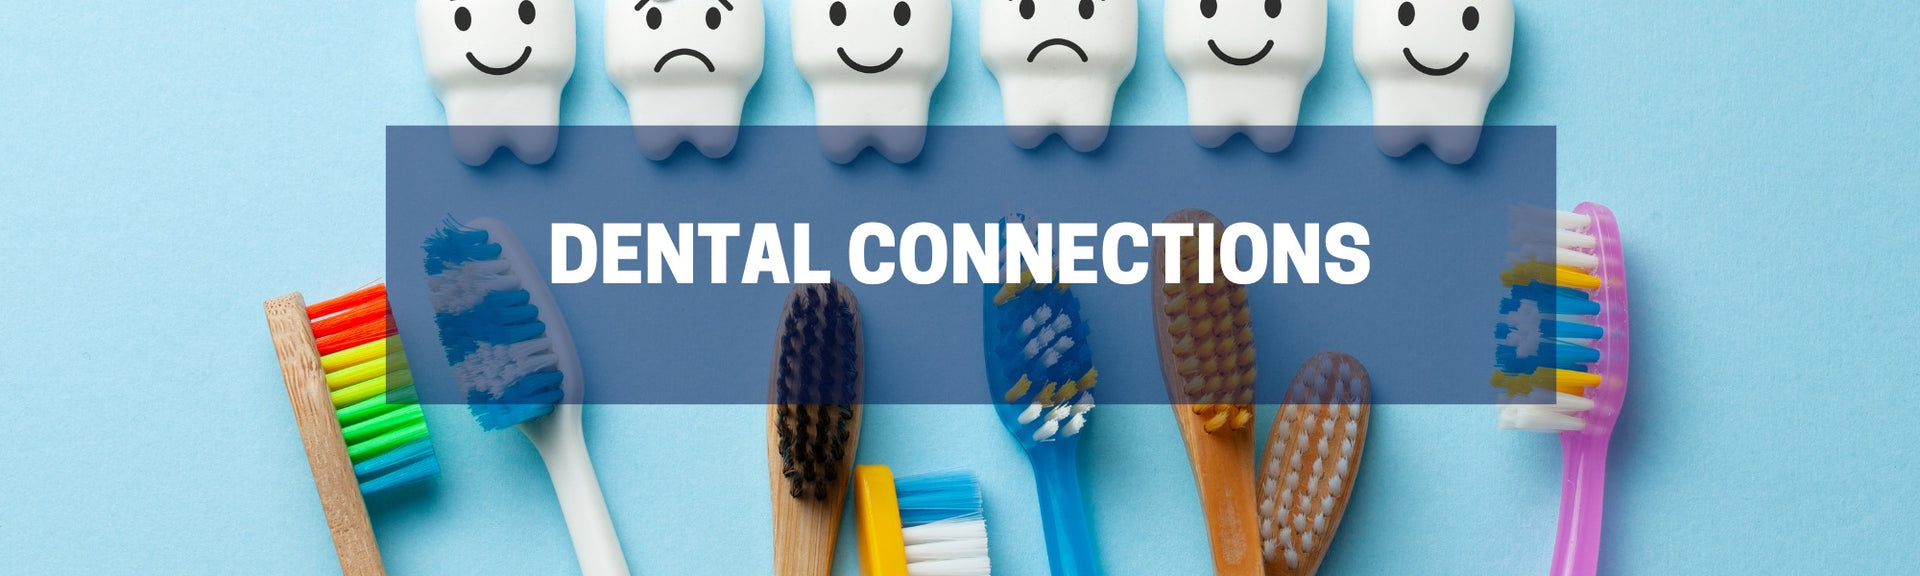 Dental Connections